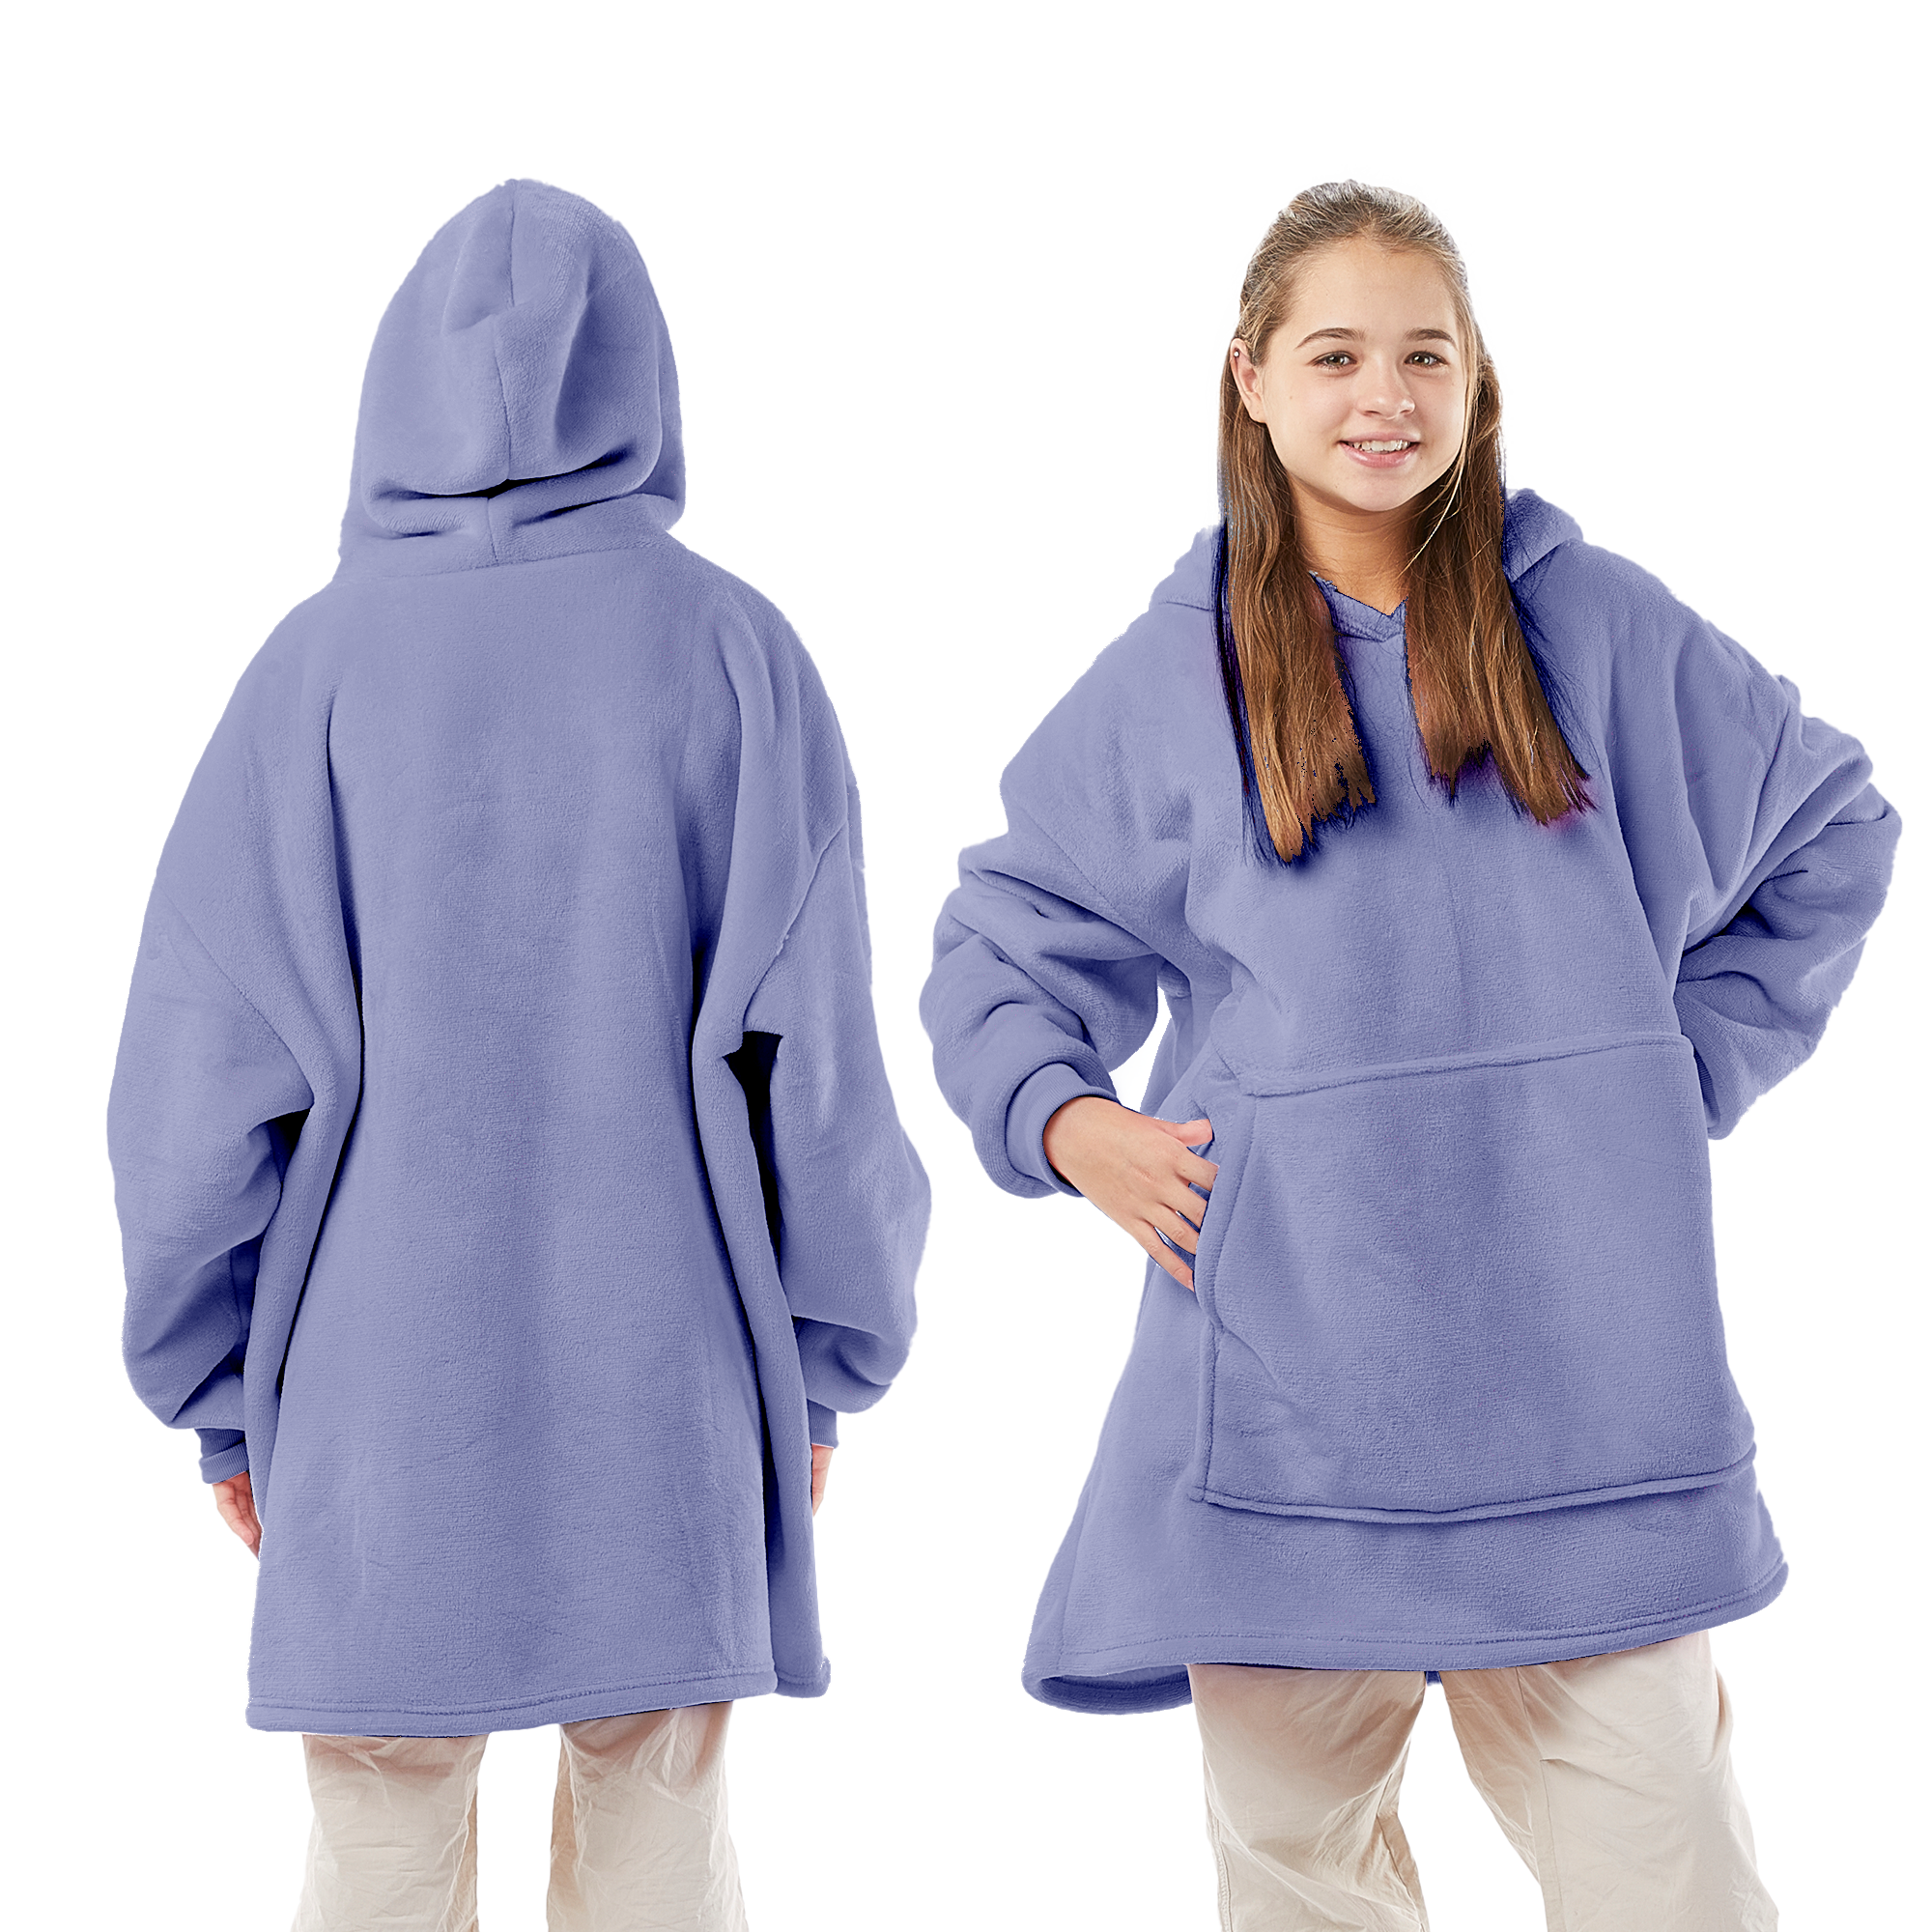 Oversized Blanket Hoodie - Thermal, Soft & Comfortable and Long Length Throw Hoodie